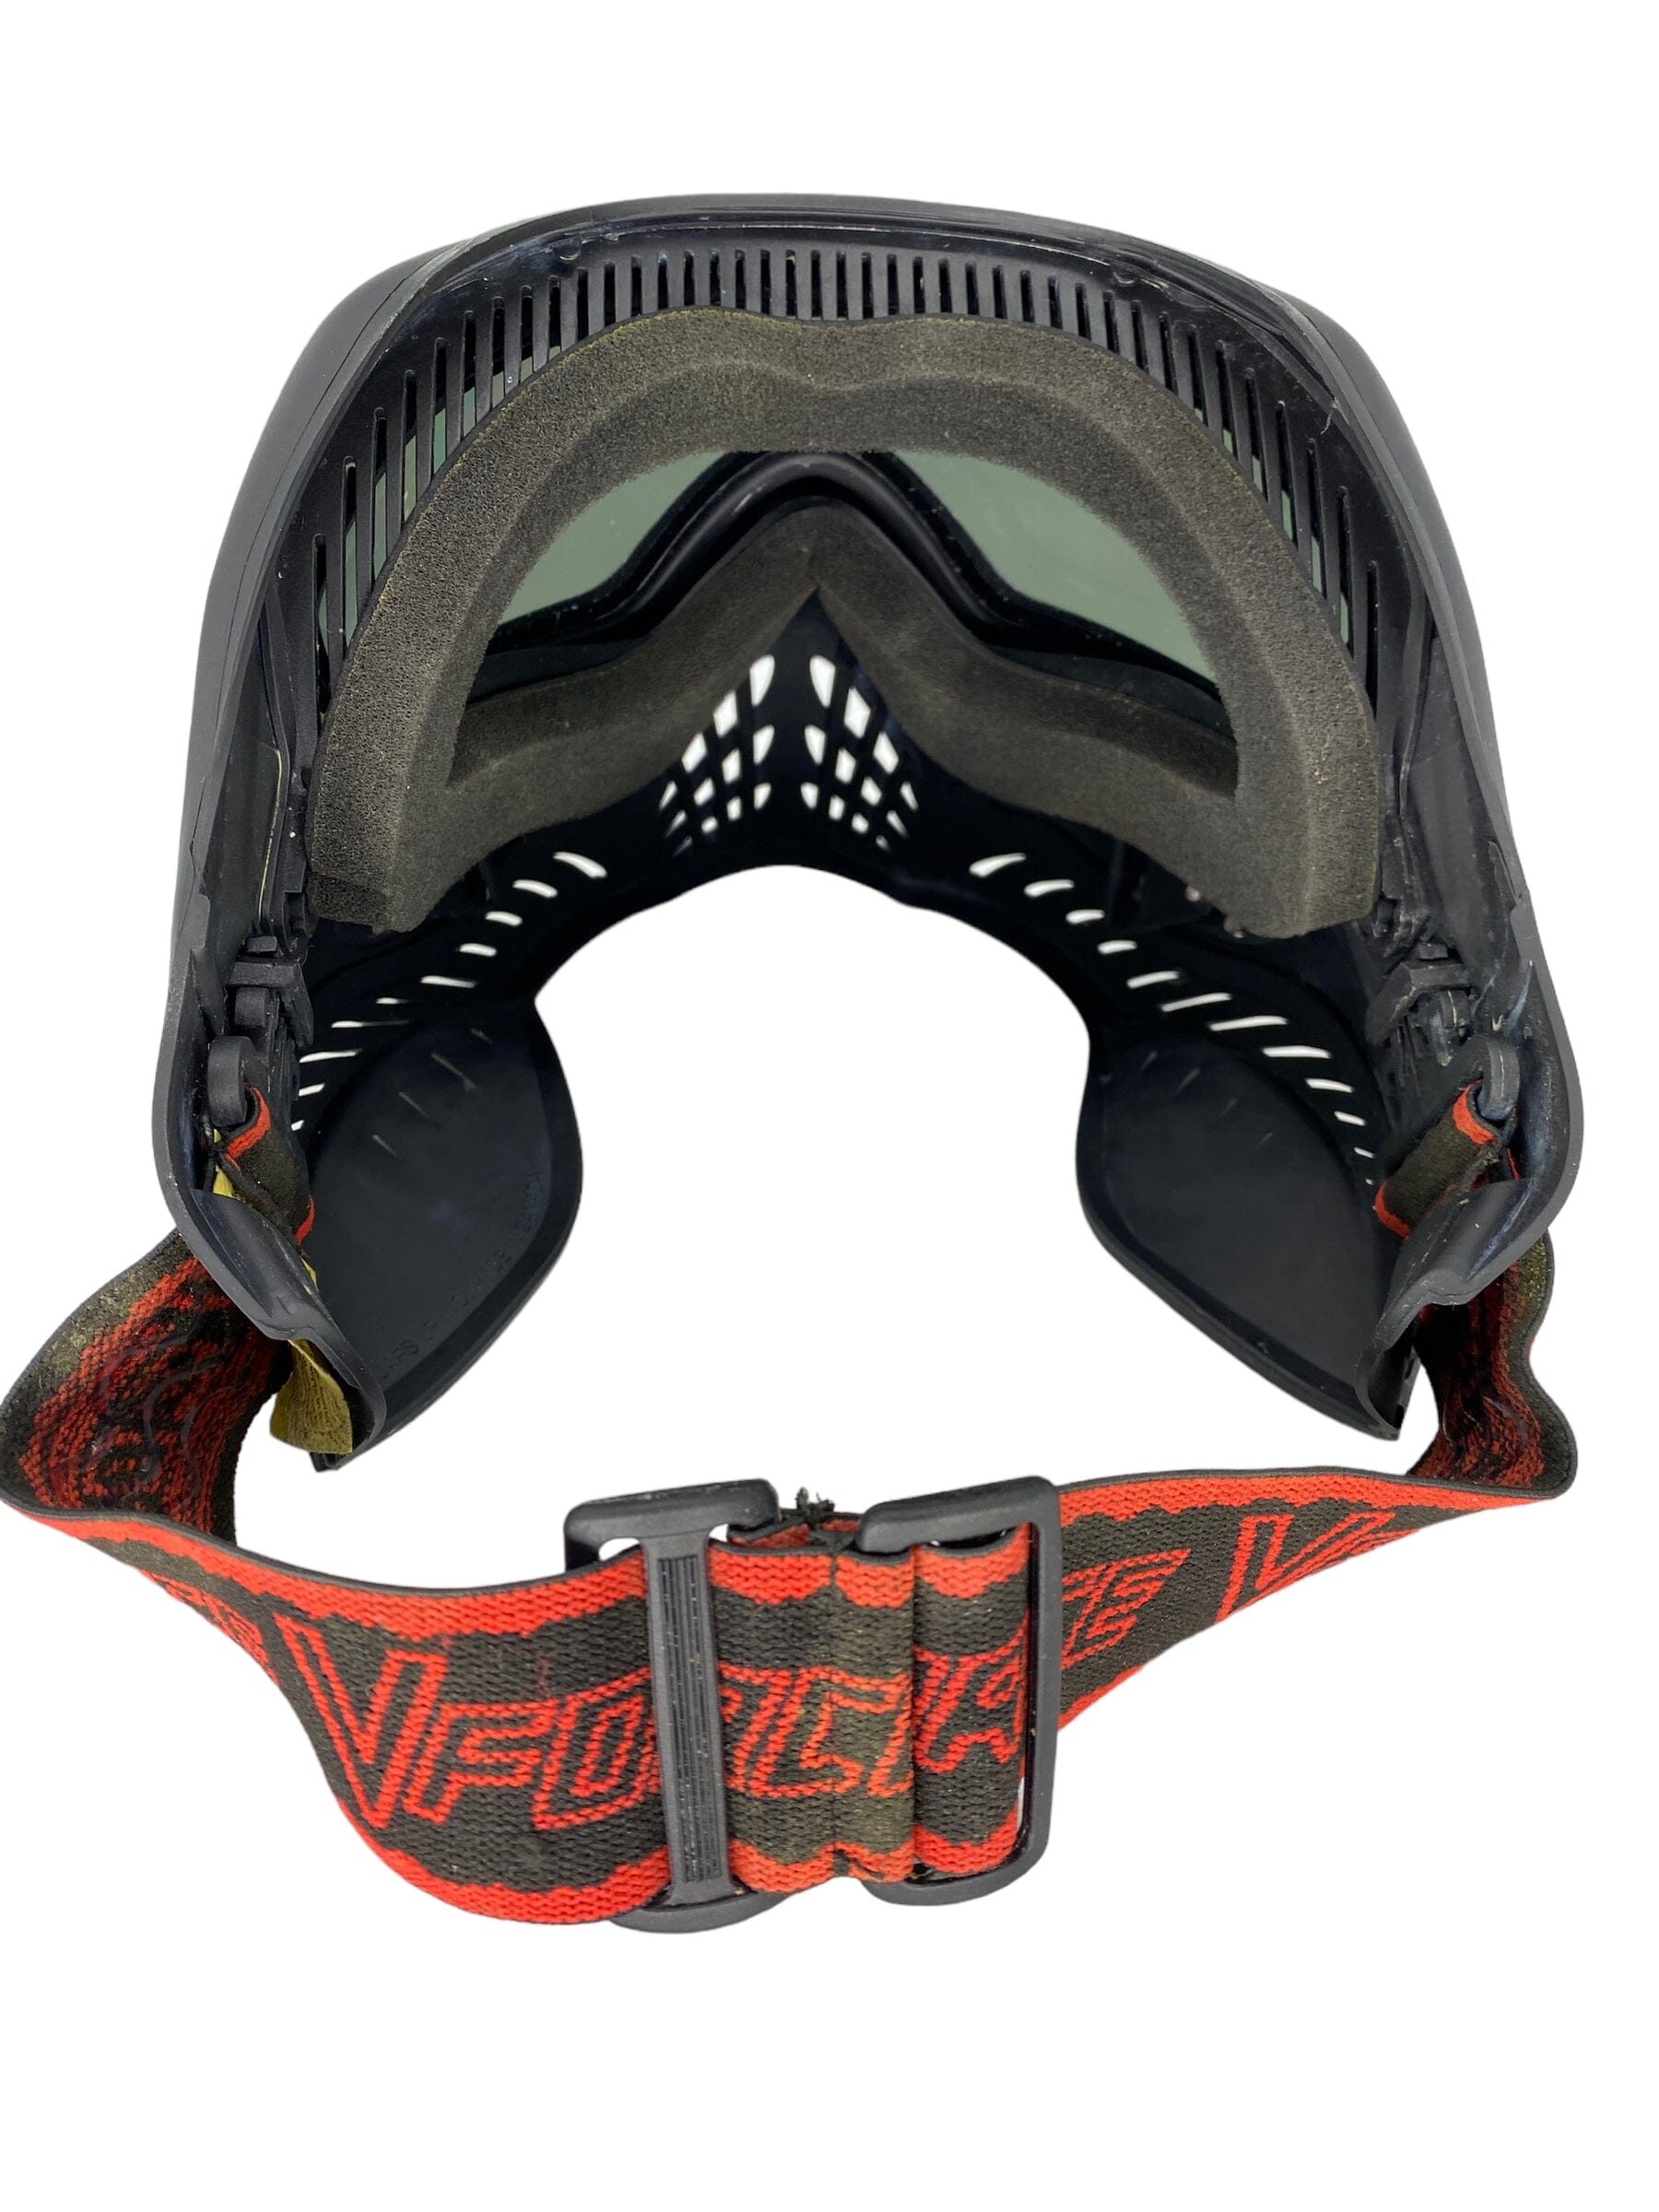 Used V Force Paintball Mask Paintball Gun from CPXBrosPaintball Buy/Sell/Trade Paintball Markers, Paintball Hoppers, Paintball Masks, and Hormesis Headbands